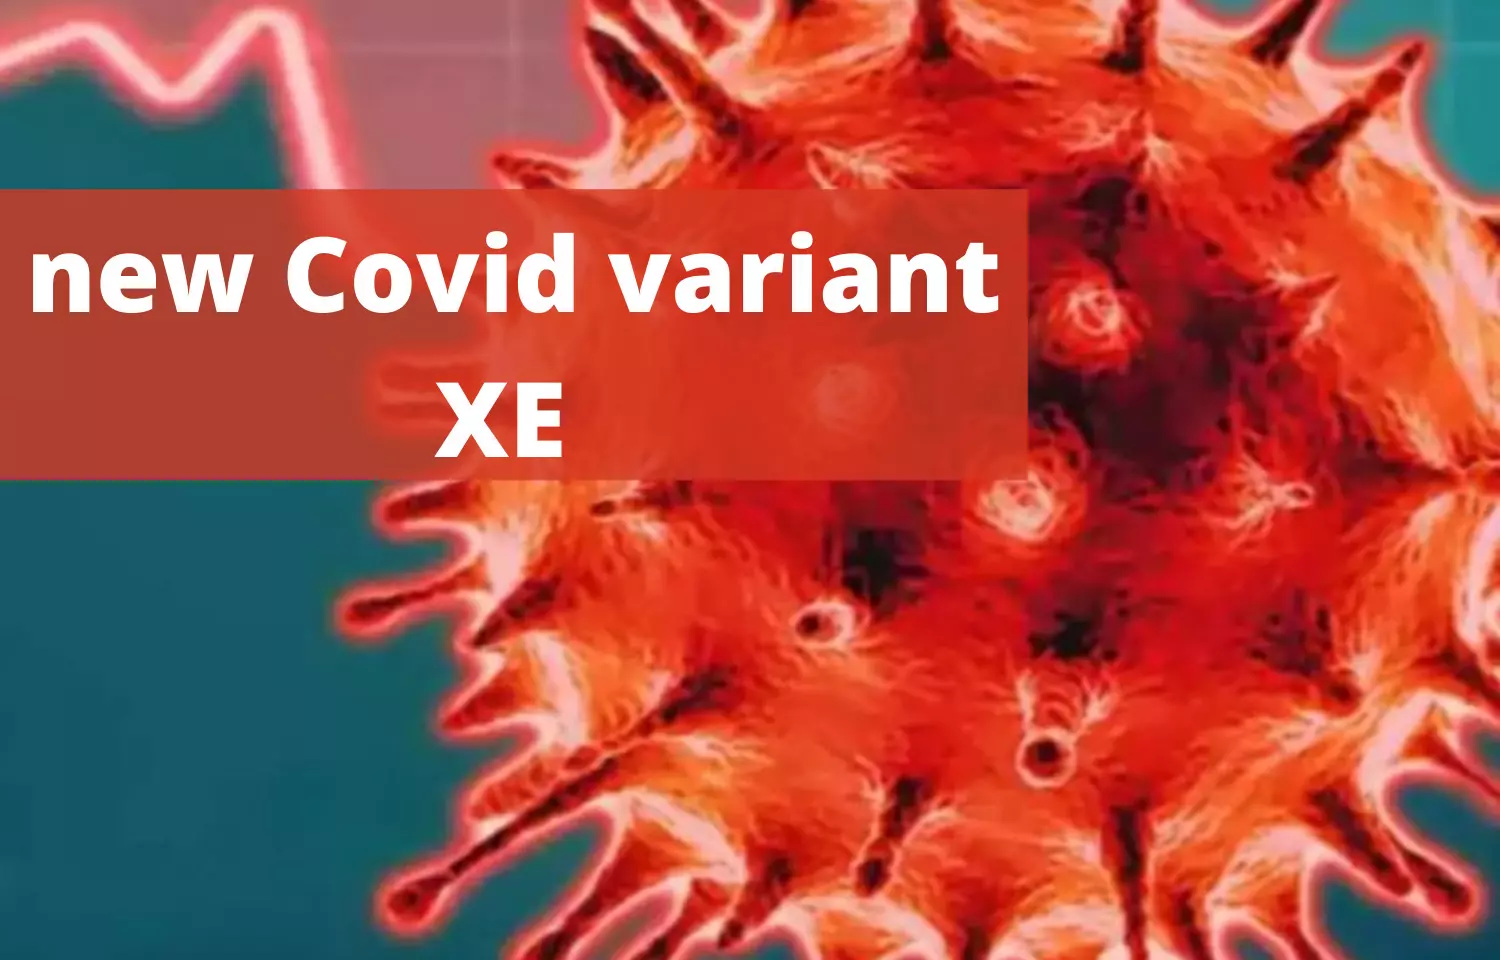 Everything About Covid-19 XE Variant, Symptoms, Precautions, and Treatment